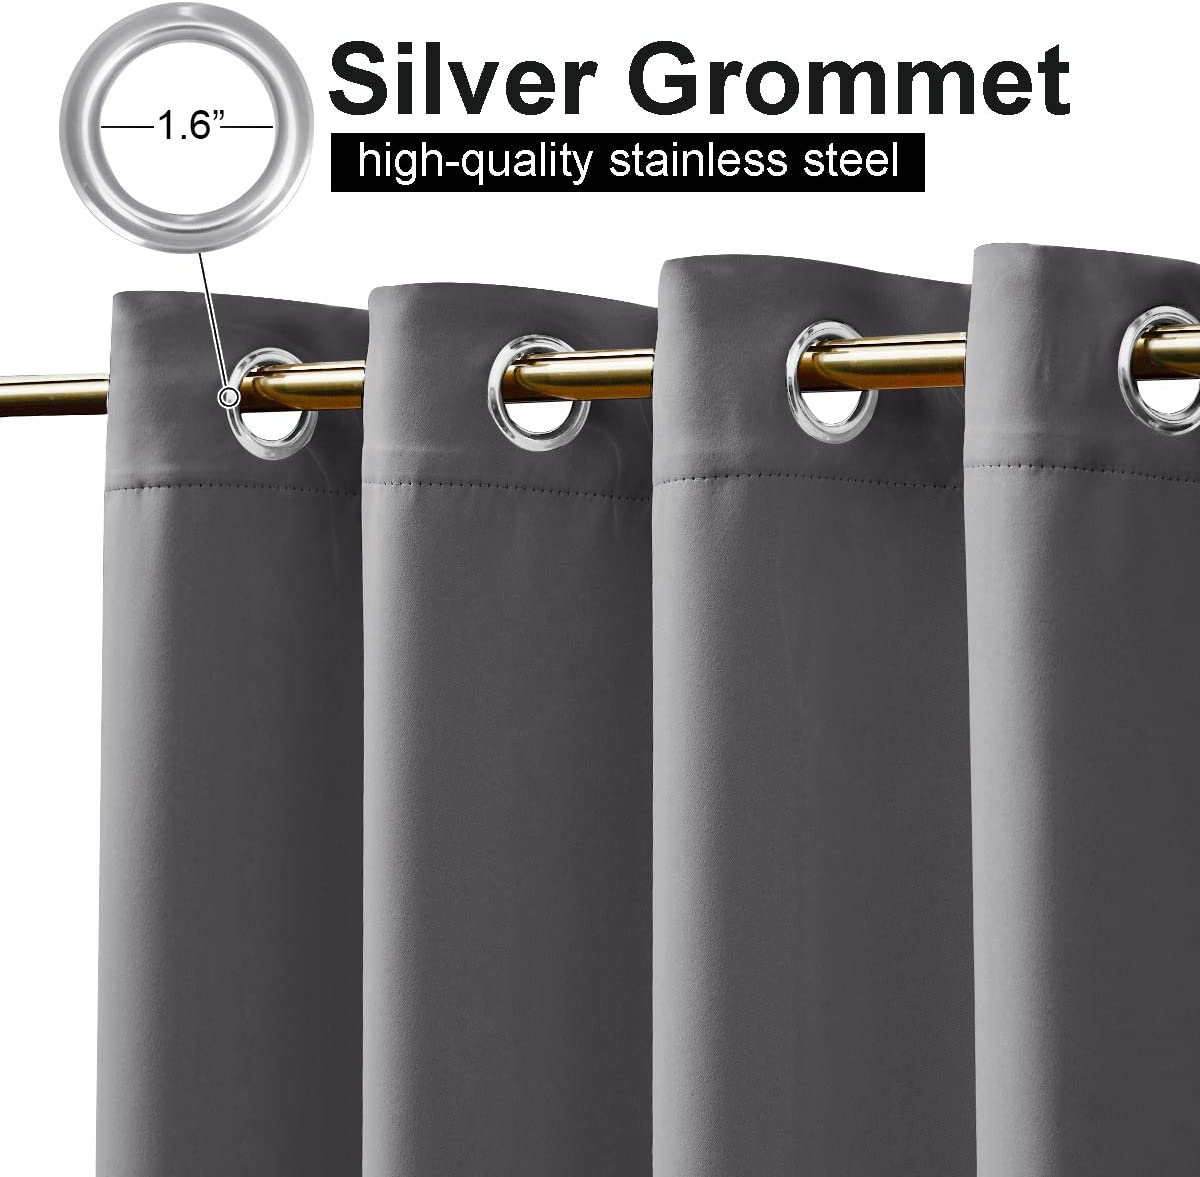 Top & Bottom Grommet Windproof Outdoor Curtains for Patio 2 Panels KGORGE Store